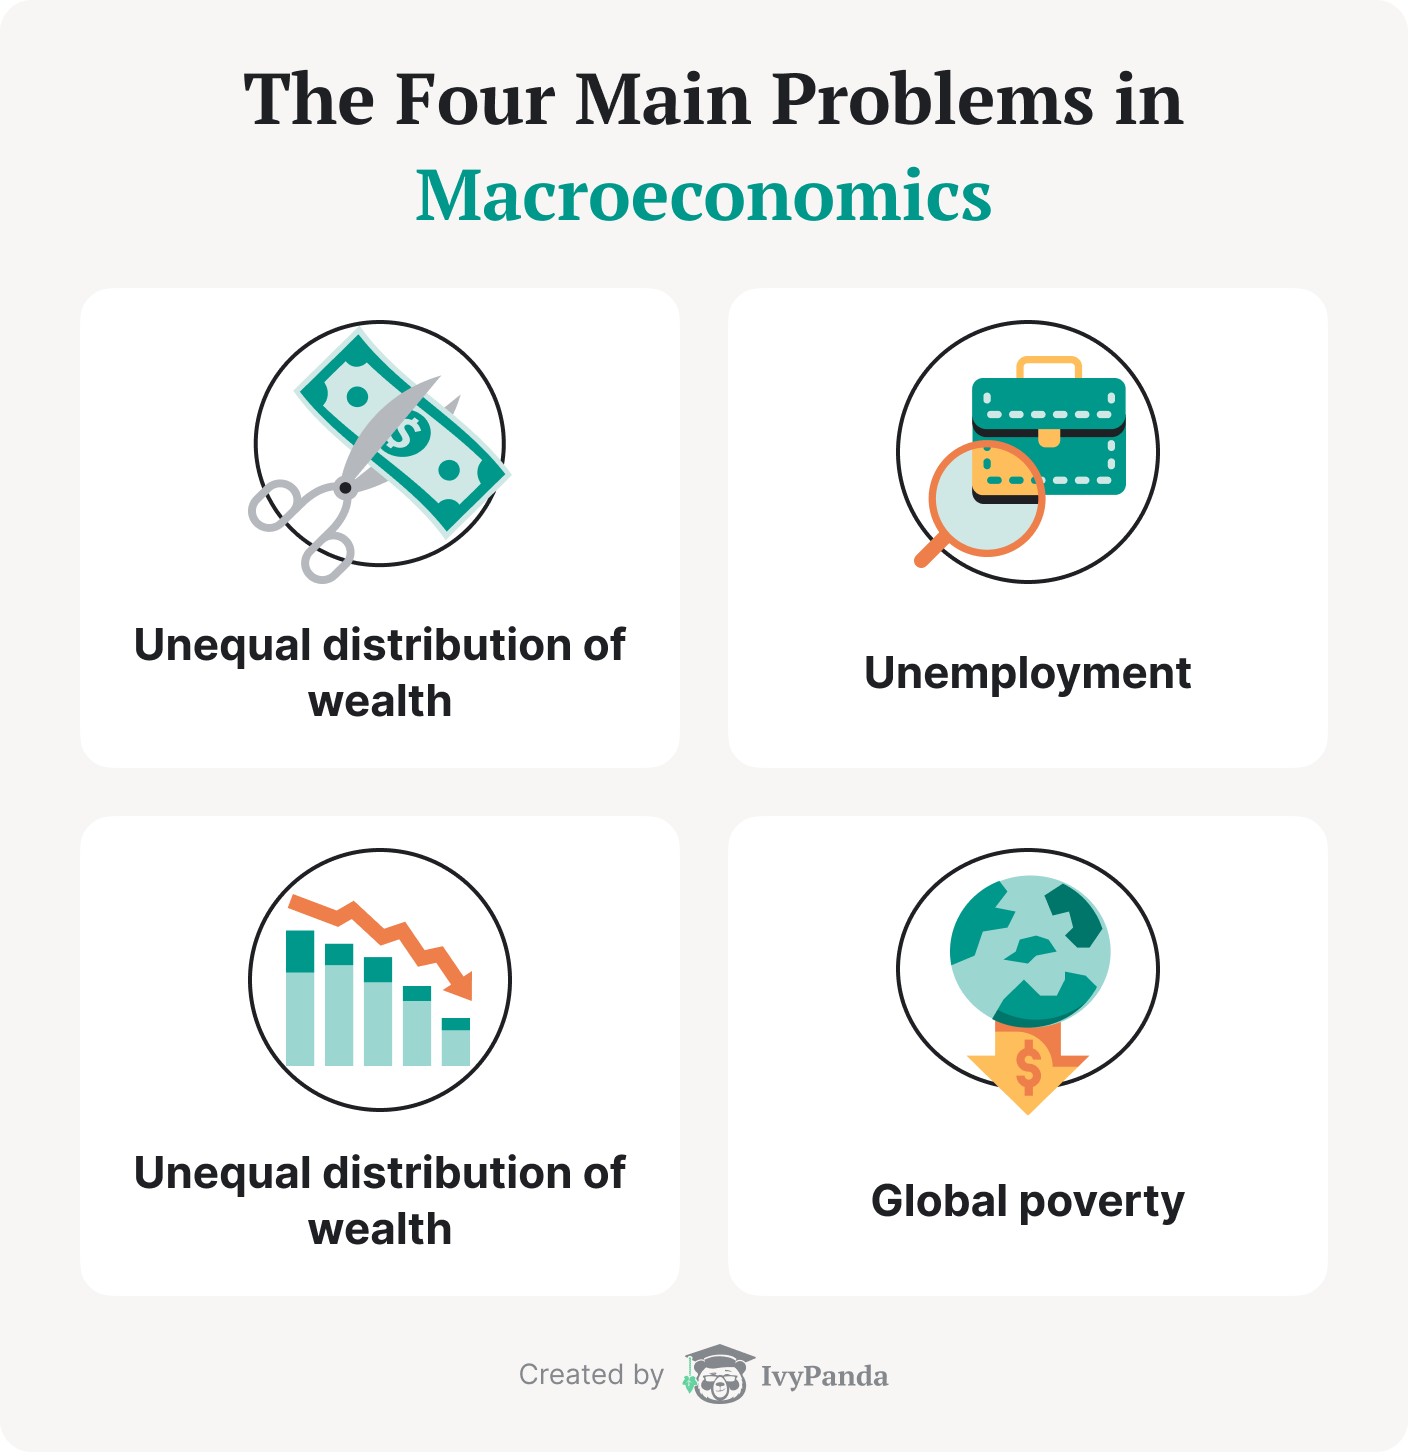 There are four main problems in macroeconomics.